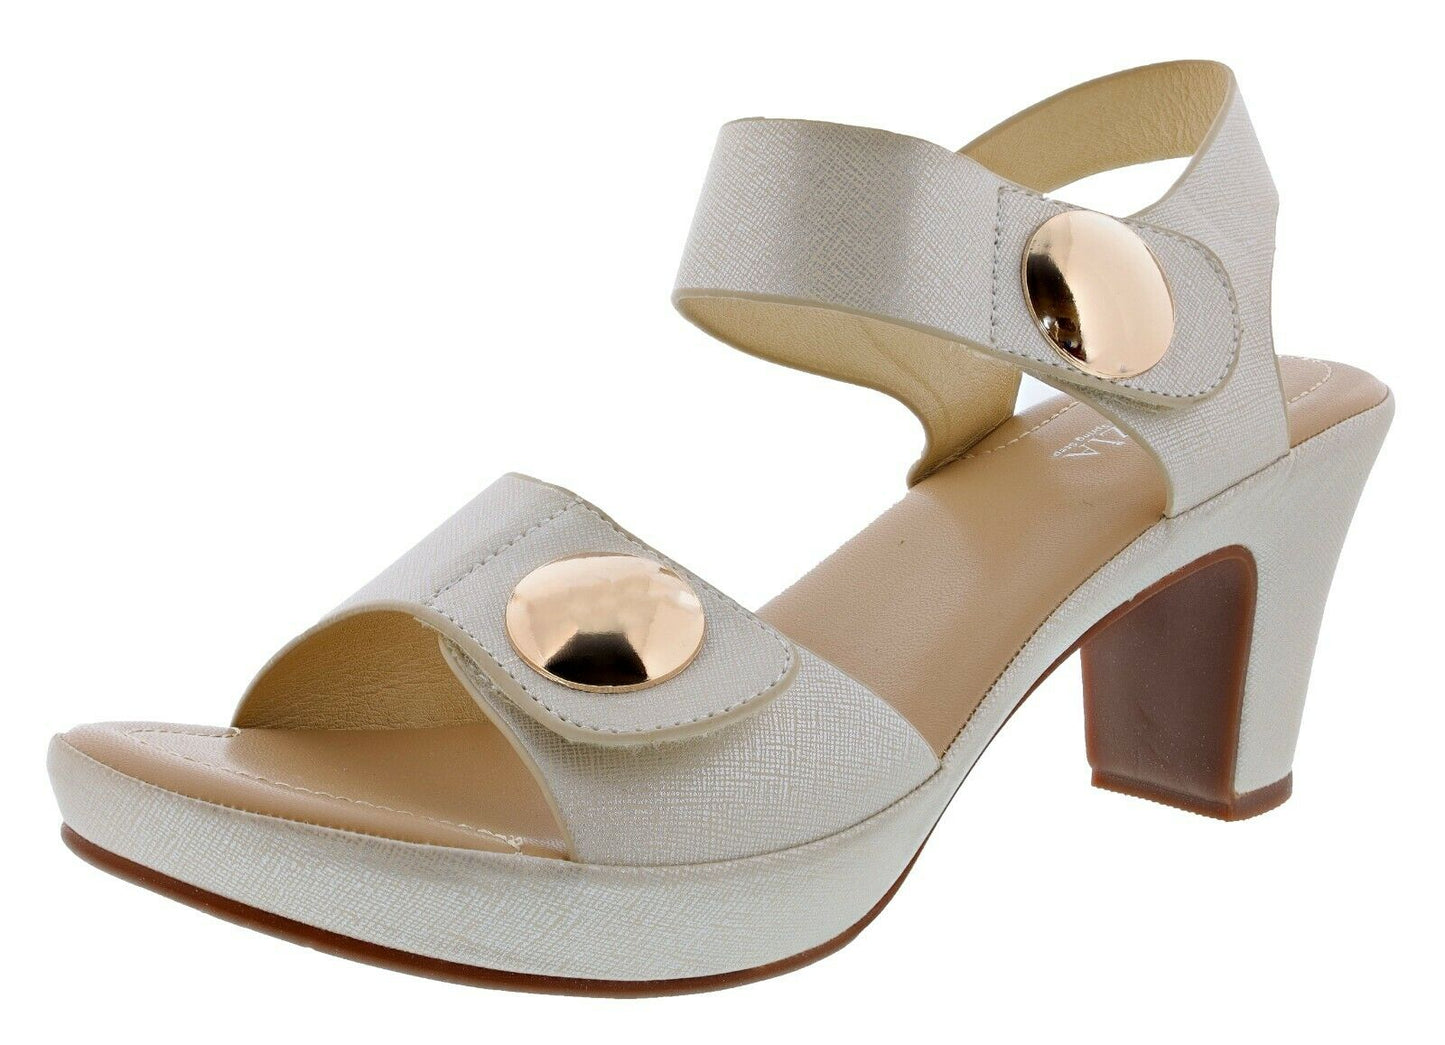 Shop for Stylish and Comfortable Women's Sandals Online